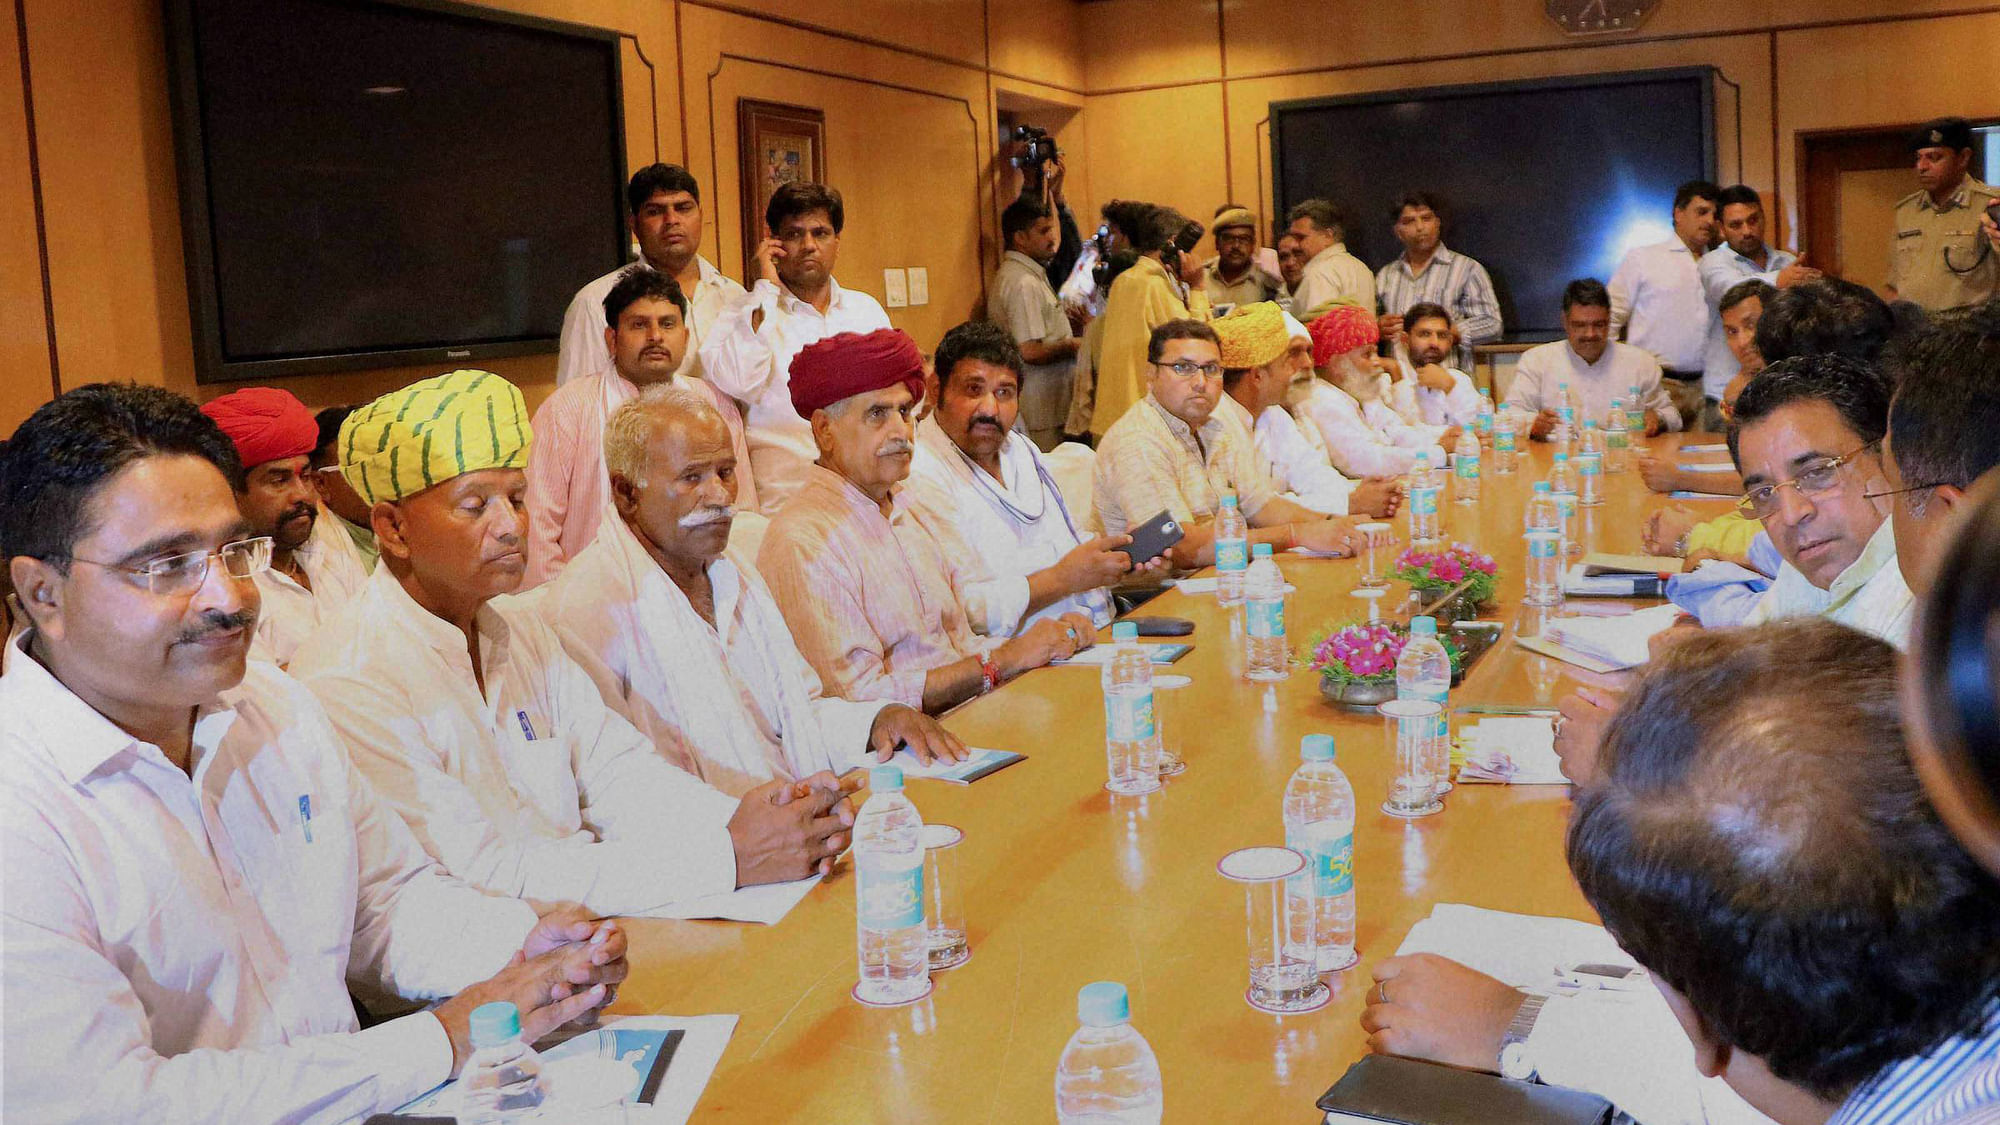  Gujjar community leader Kirori Singh Bainsla along with a delegation meeting with Rajasthan Cabinet Ministers. (Photo: PTI)